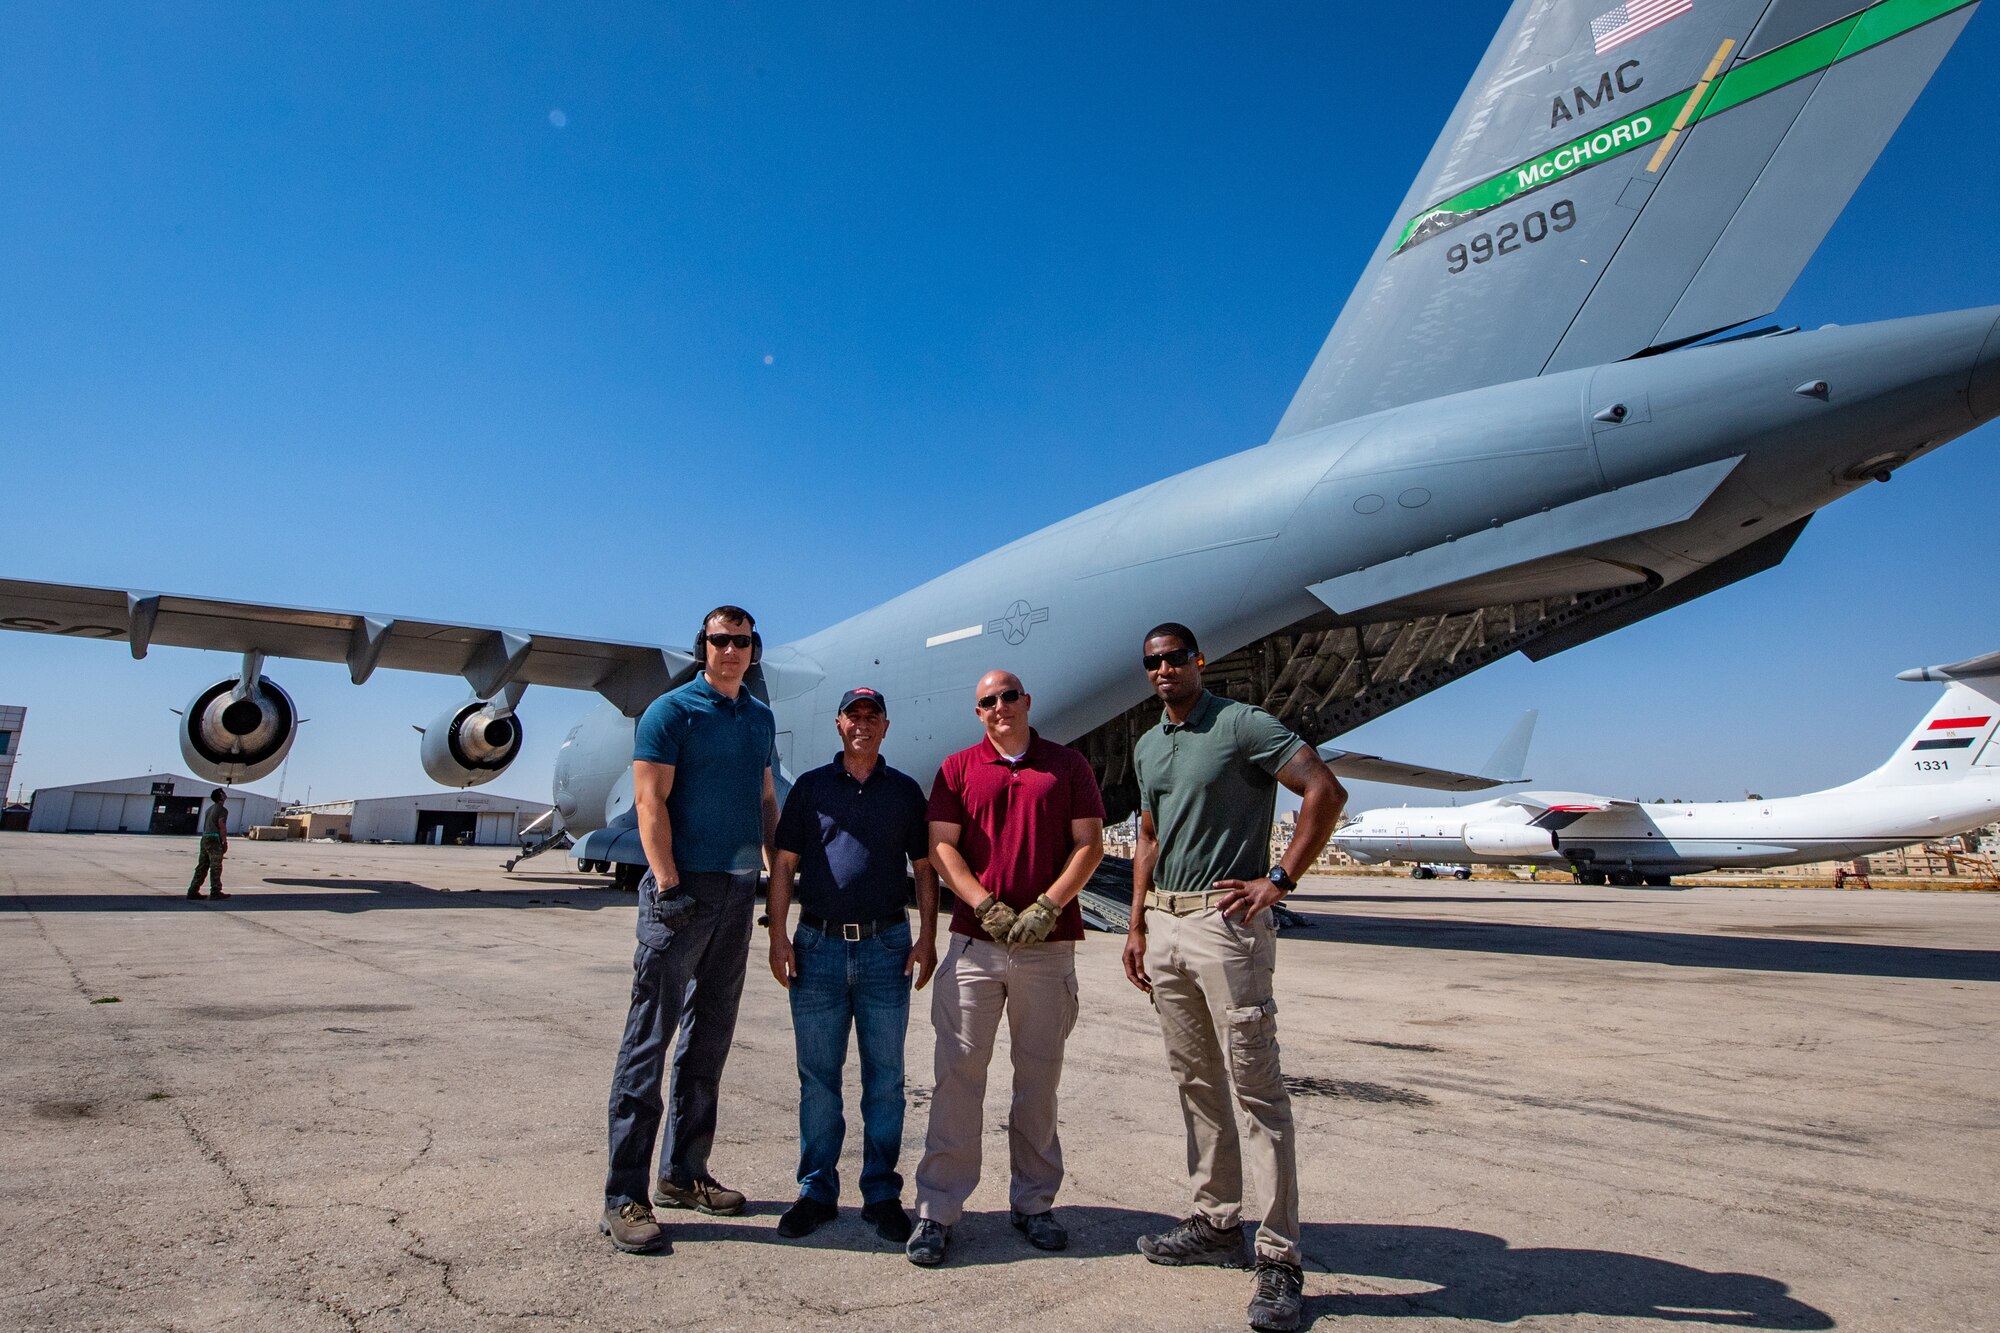 Members of the American Embassy to Jordan, Military Assistance Program, Aerial Logistics Port pose for a picture in front of a U.S. C-17 Globemaster III in Jordan, Oct. 14, 2019. During the team’s time in Jordan they have handled over 370 missions, coordinated logistics for 430 tons of cargo, and manifested over 3,000 passengers in support of State Department diplomatic efforts and Department of Defense training missions such as Exercise Eager Lion, U.S. Central Command’s largest exercise. Pictured are: Staff Sgt. Tony Bellew, Mr. Akram Al Ramone, Tech. Sgt. Kyle Hersel, and Master Sgt. Chester Moore.